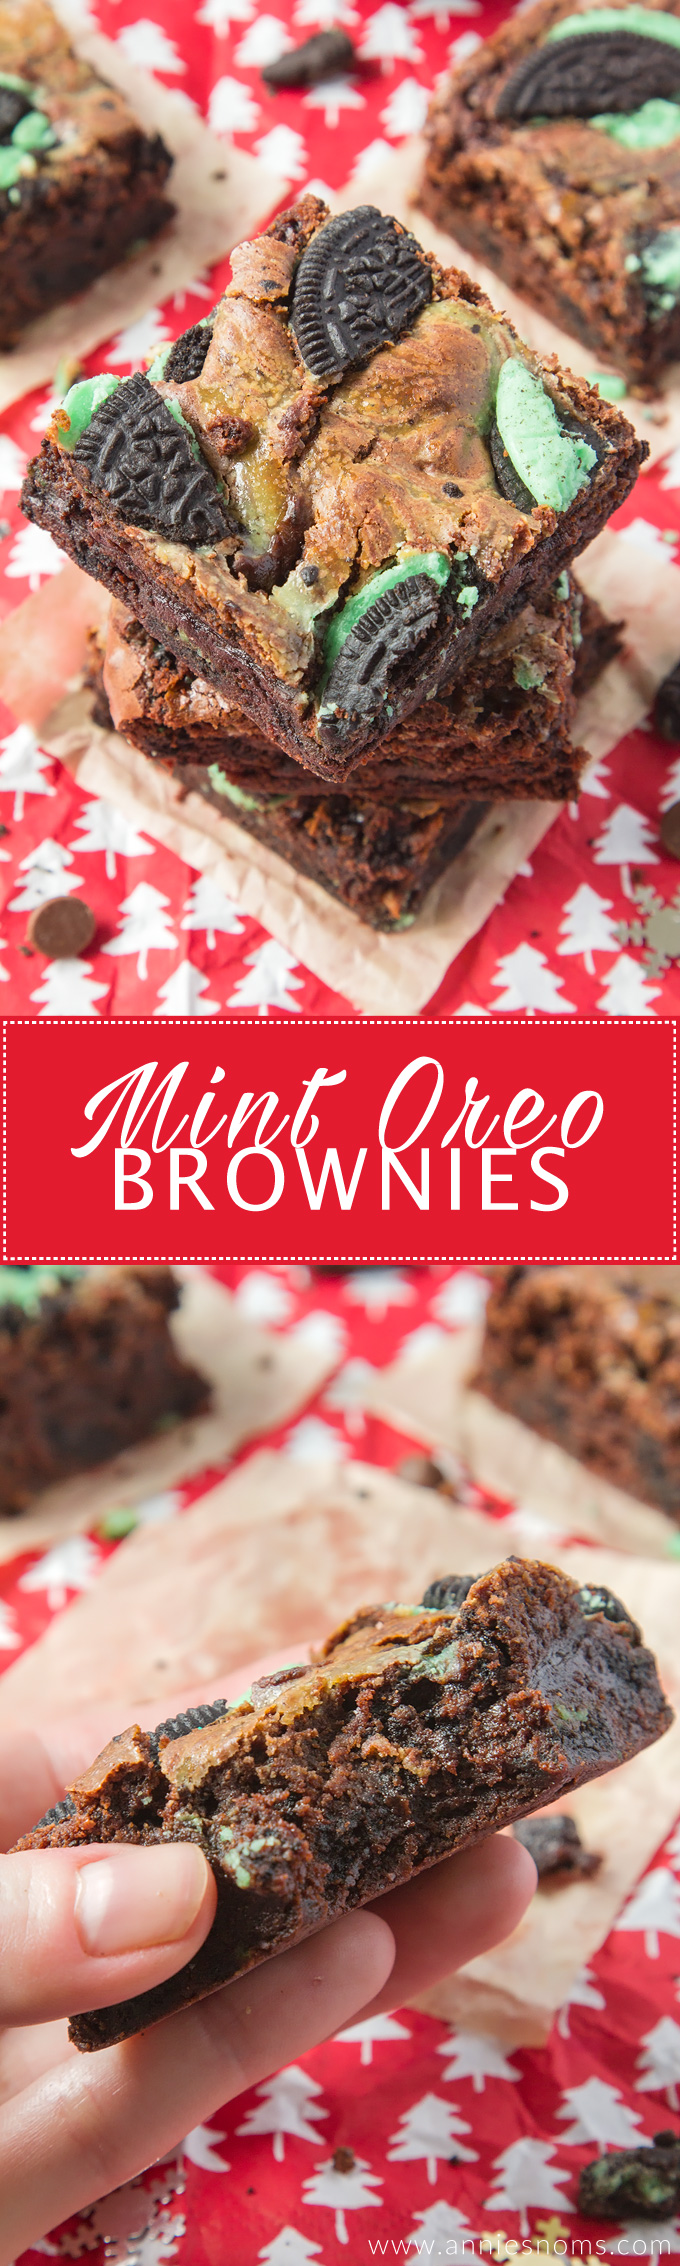 Thick, fudgy double chocolate brownies filled with crushed Mint Oreo's. A super decadent festive treat the whole family will love!